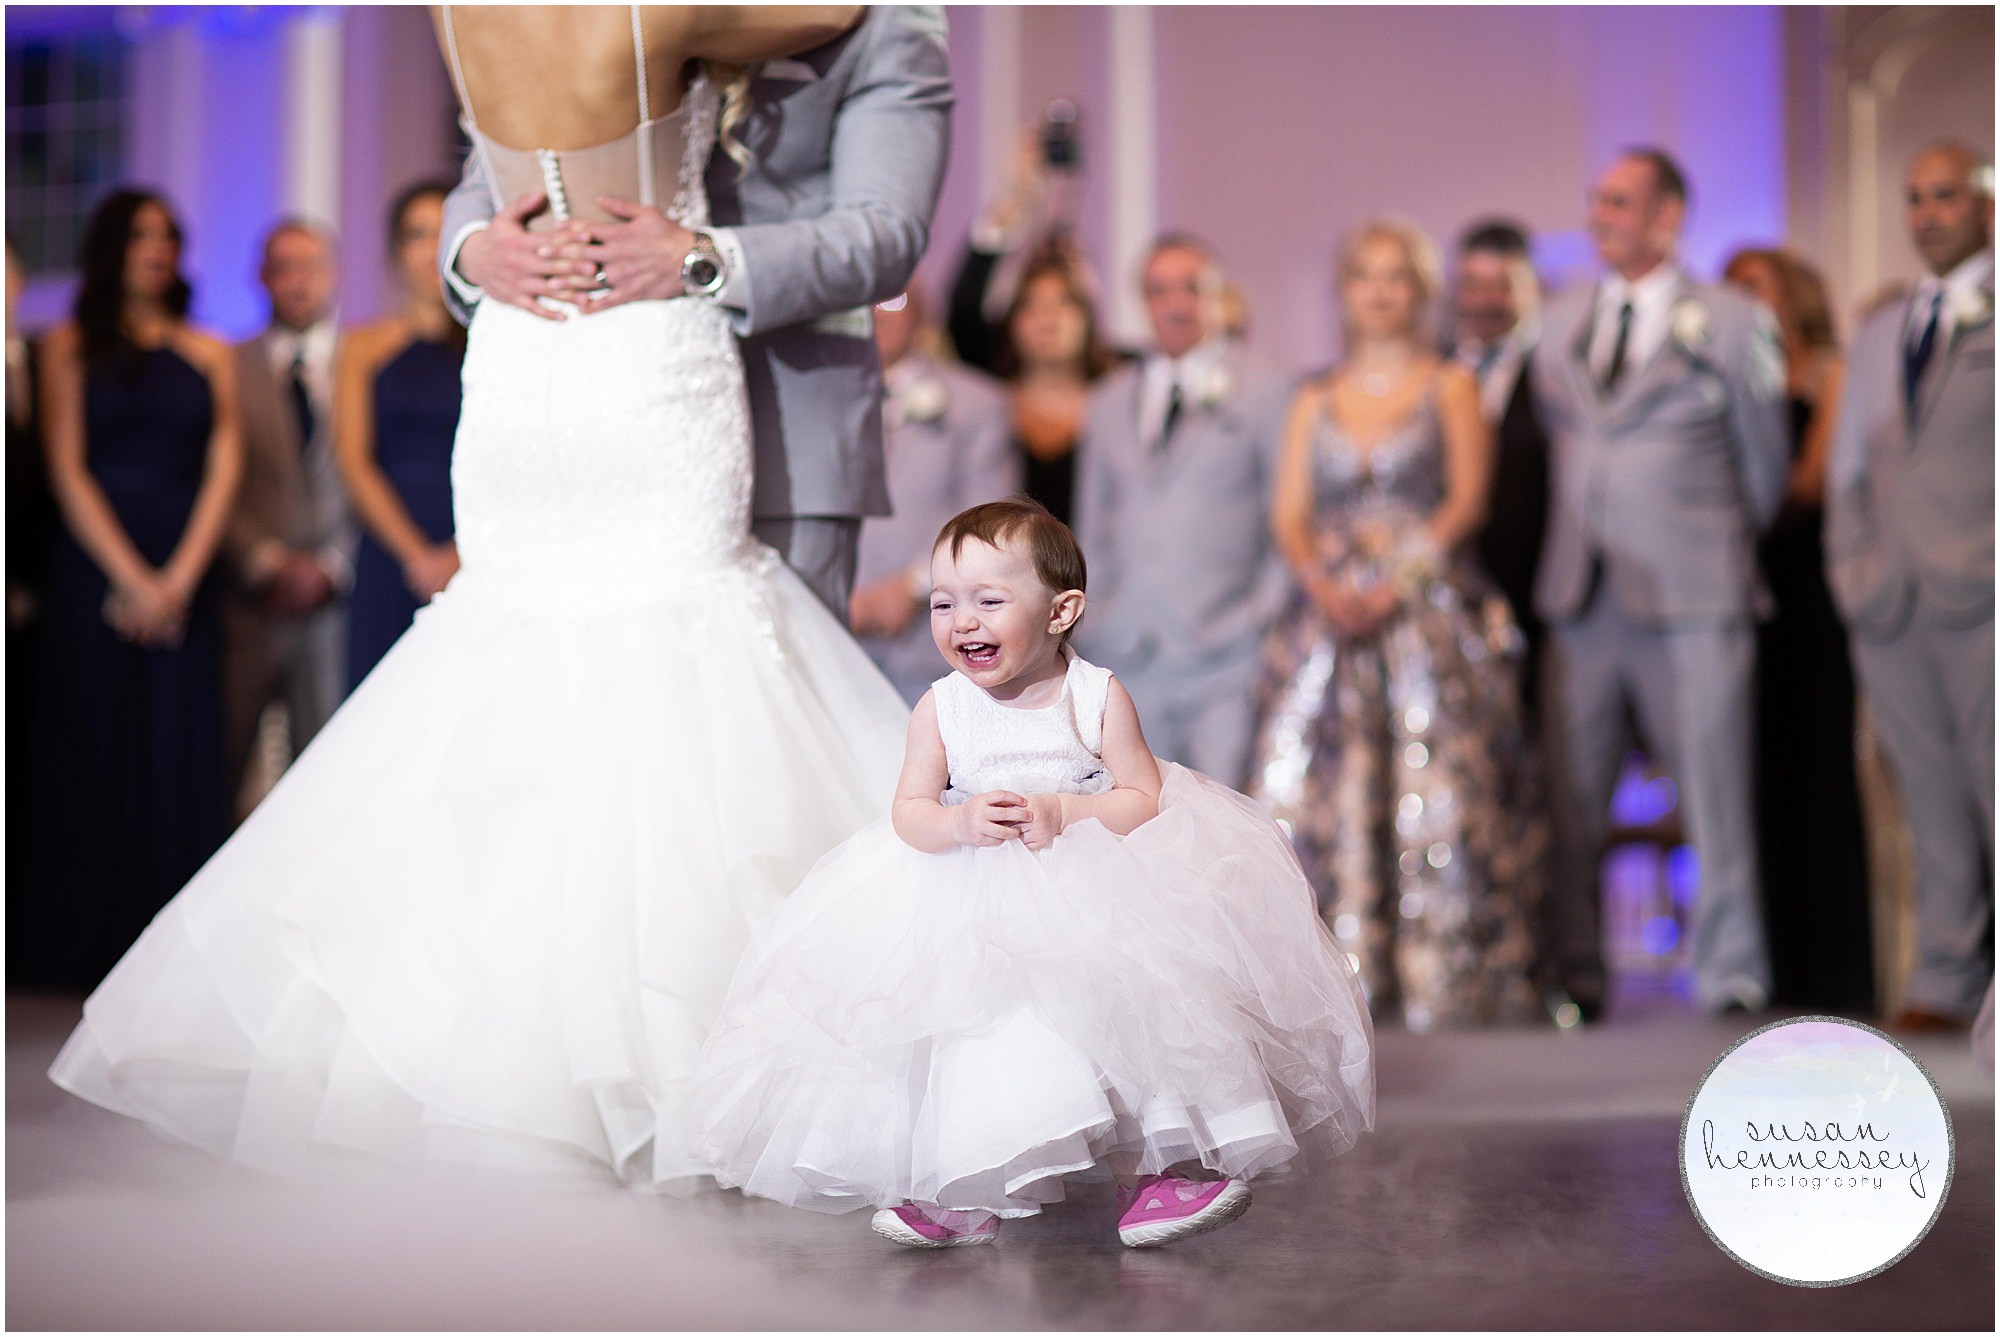 Toddler steals the show during bride and groom's first dance.